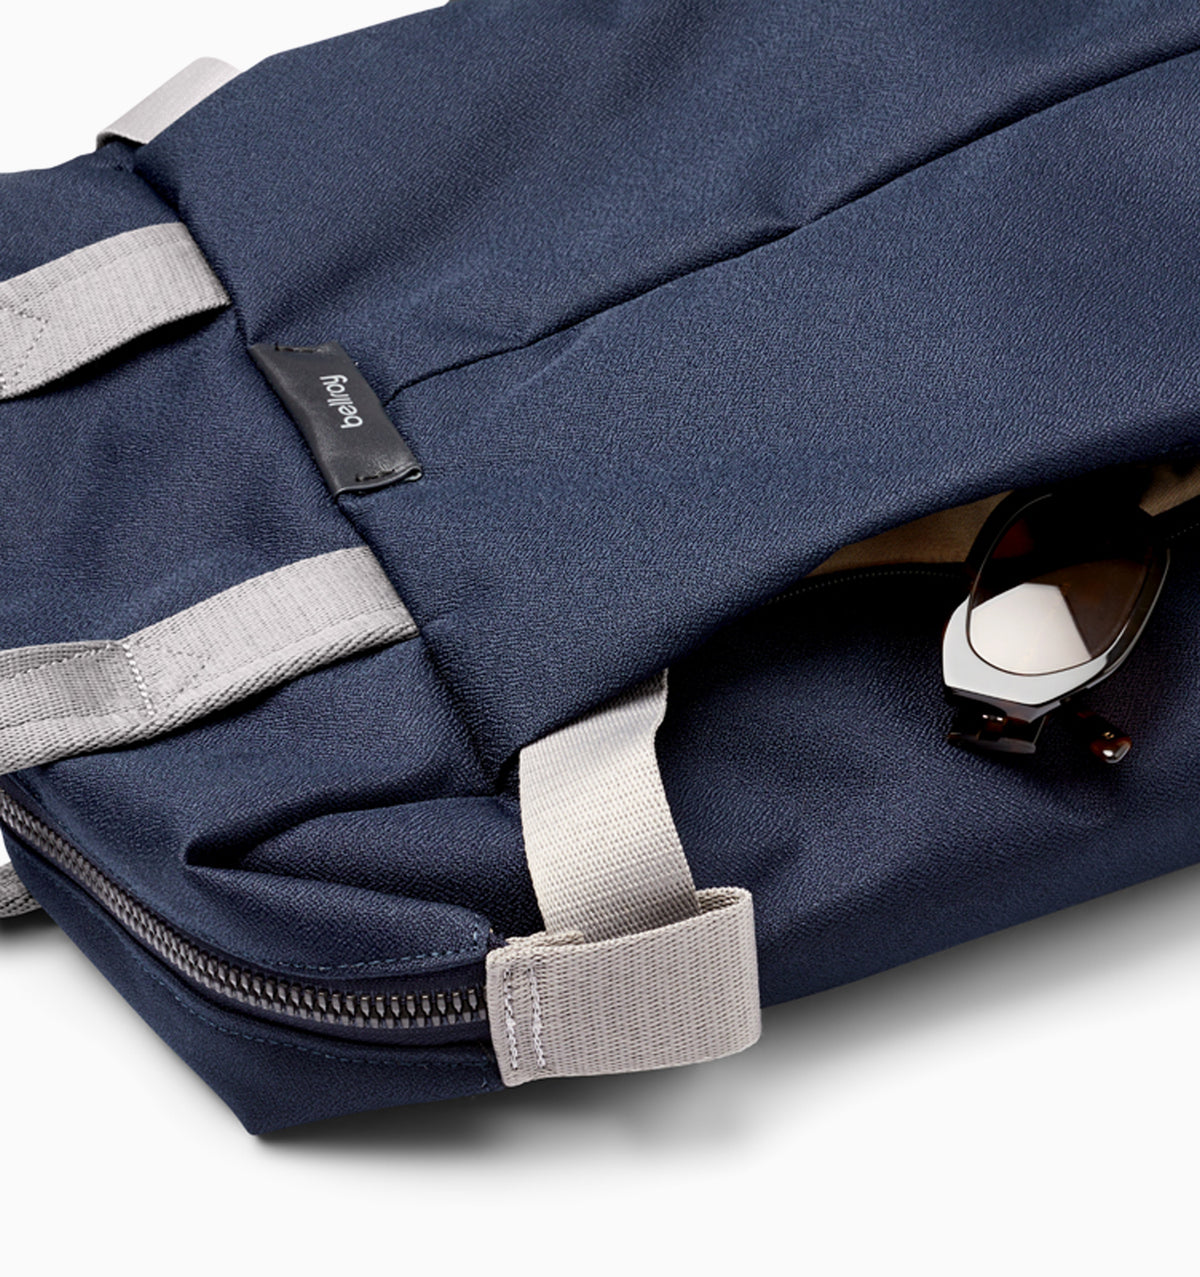 Bellroy Tokyo Totepack Compact - Navy